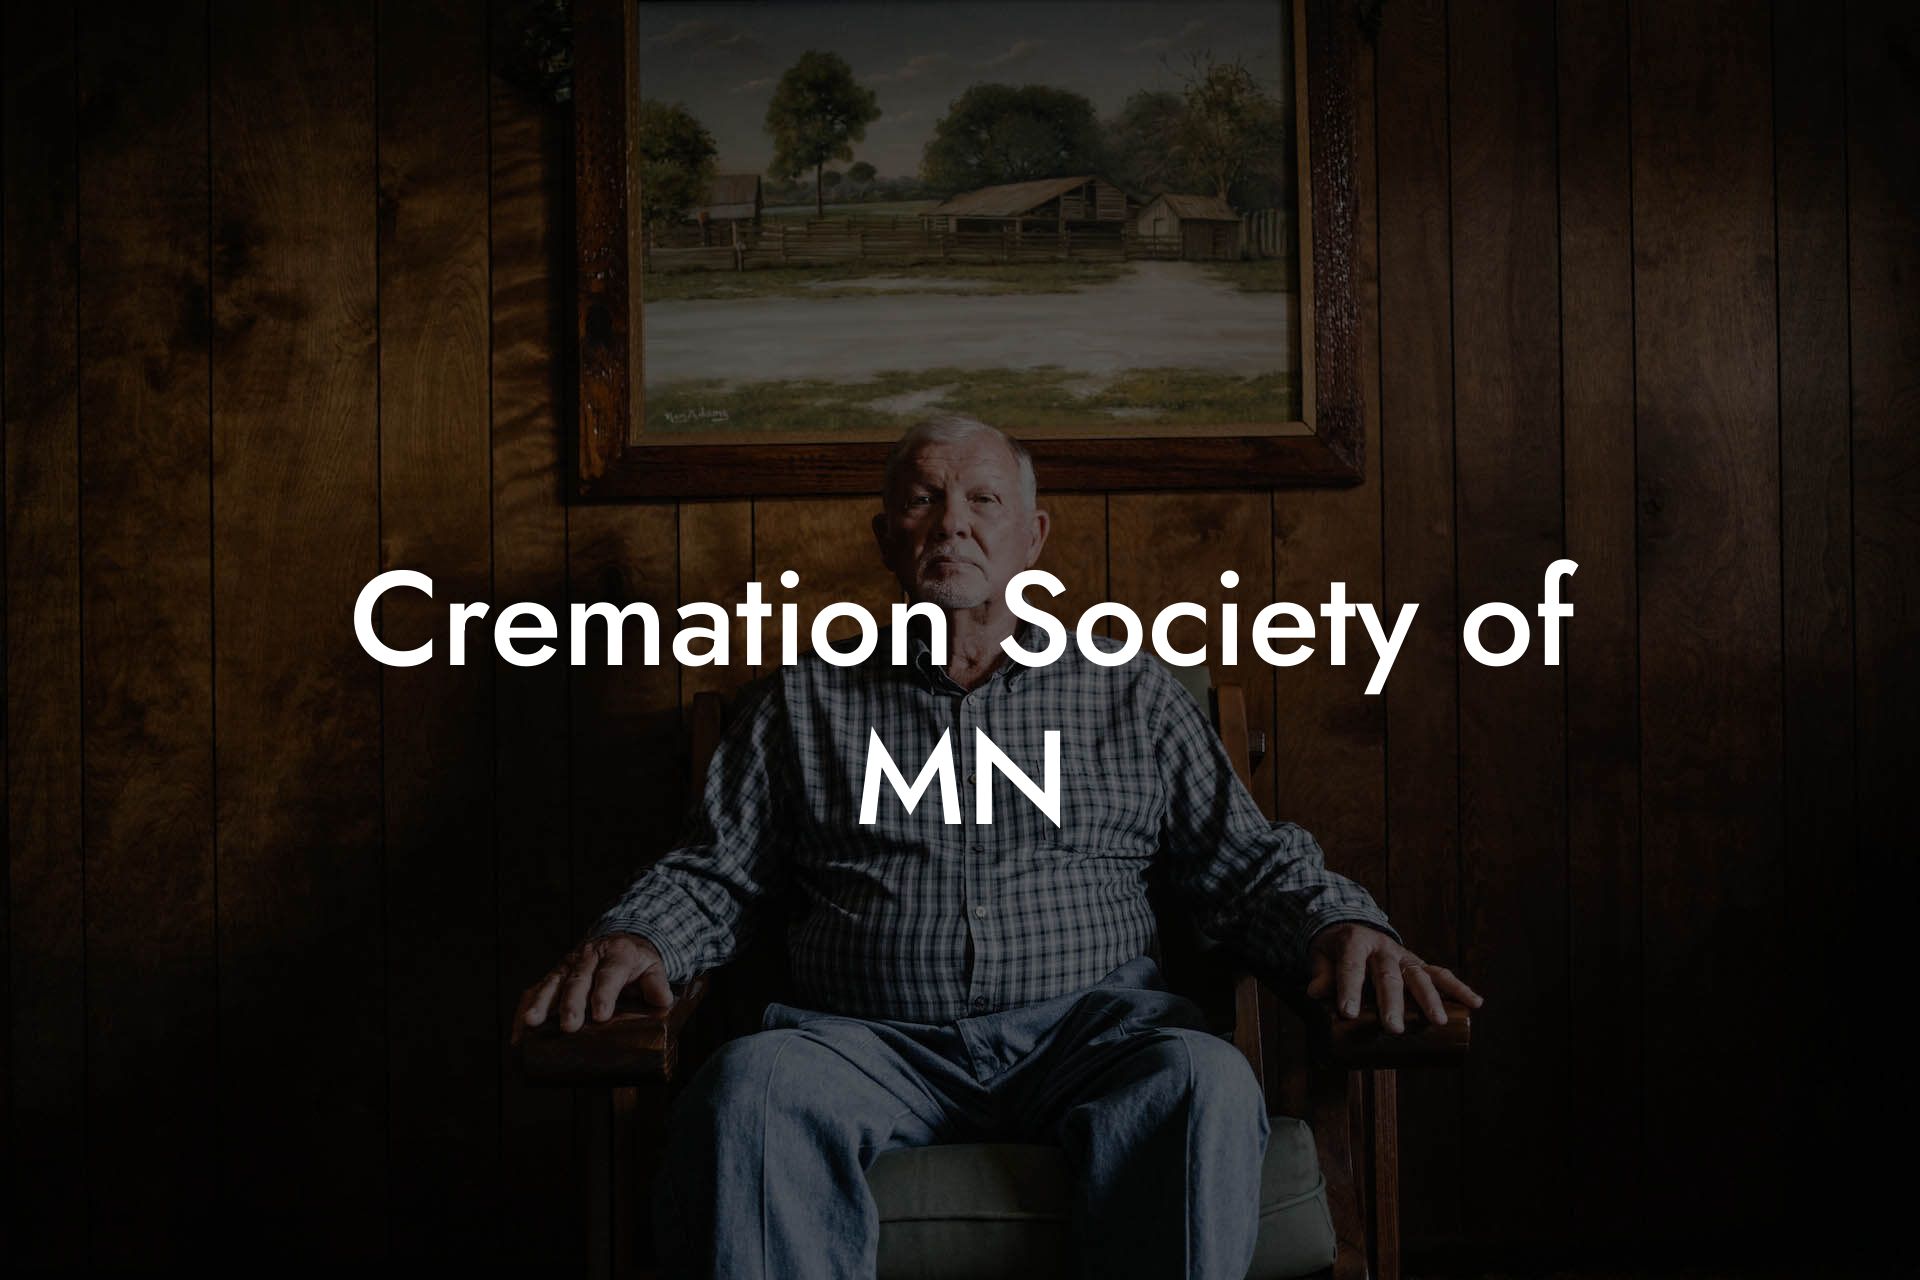 Cremation Society of MN